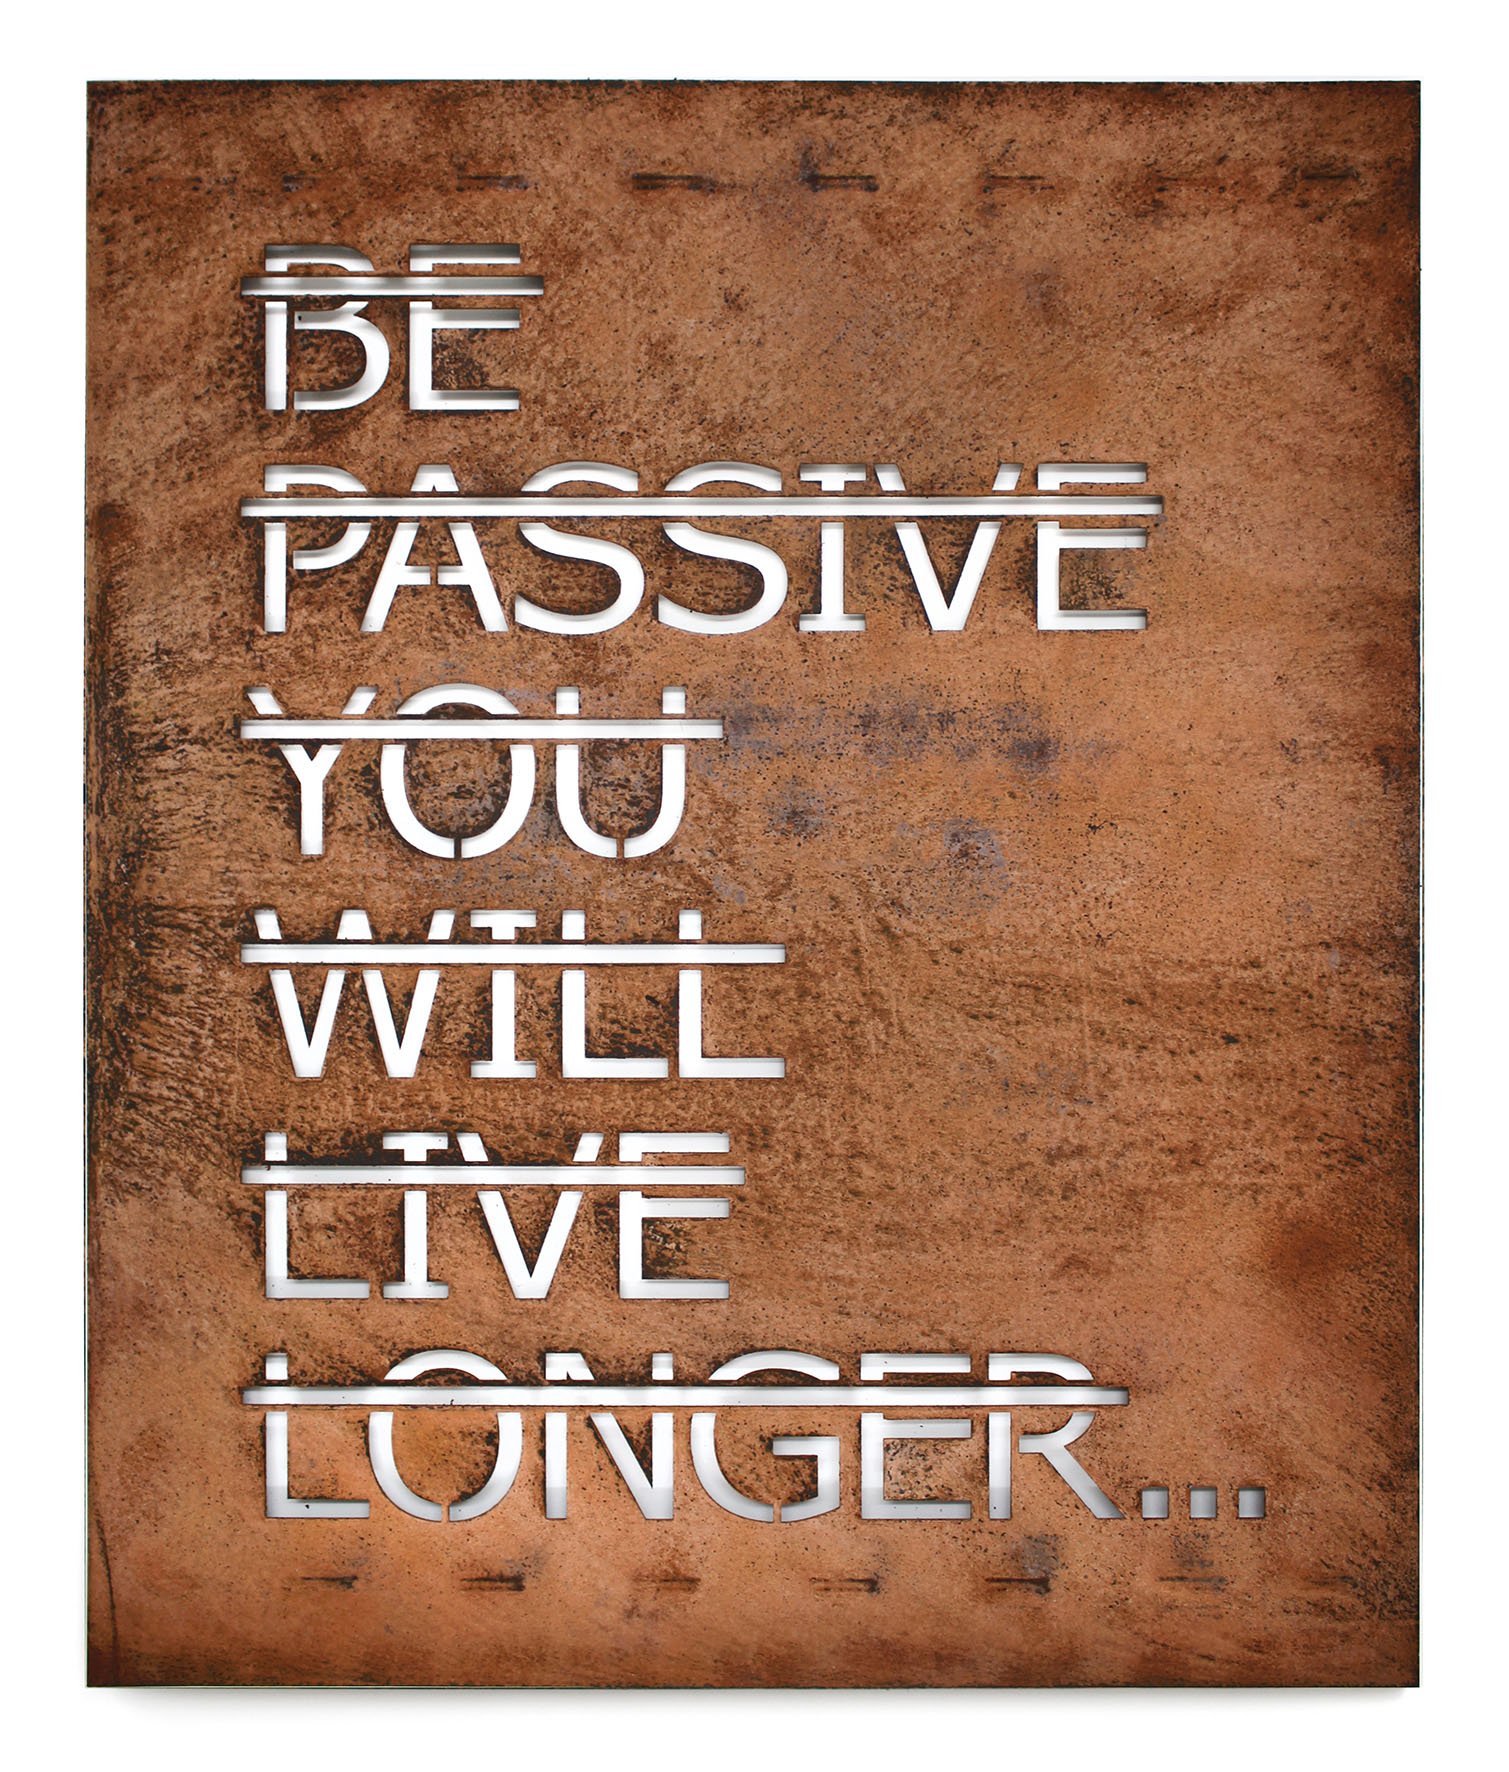 Untitled (BE PASSIVE YOU WILL LIVE LONGER...)